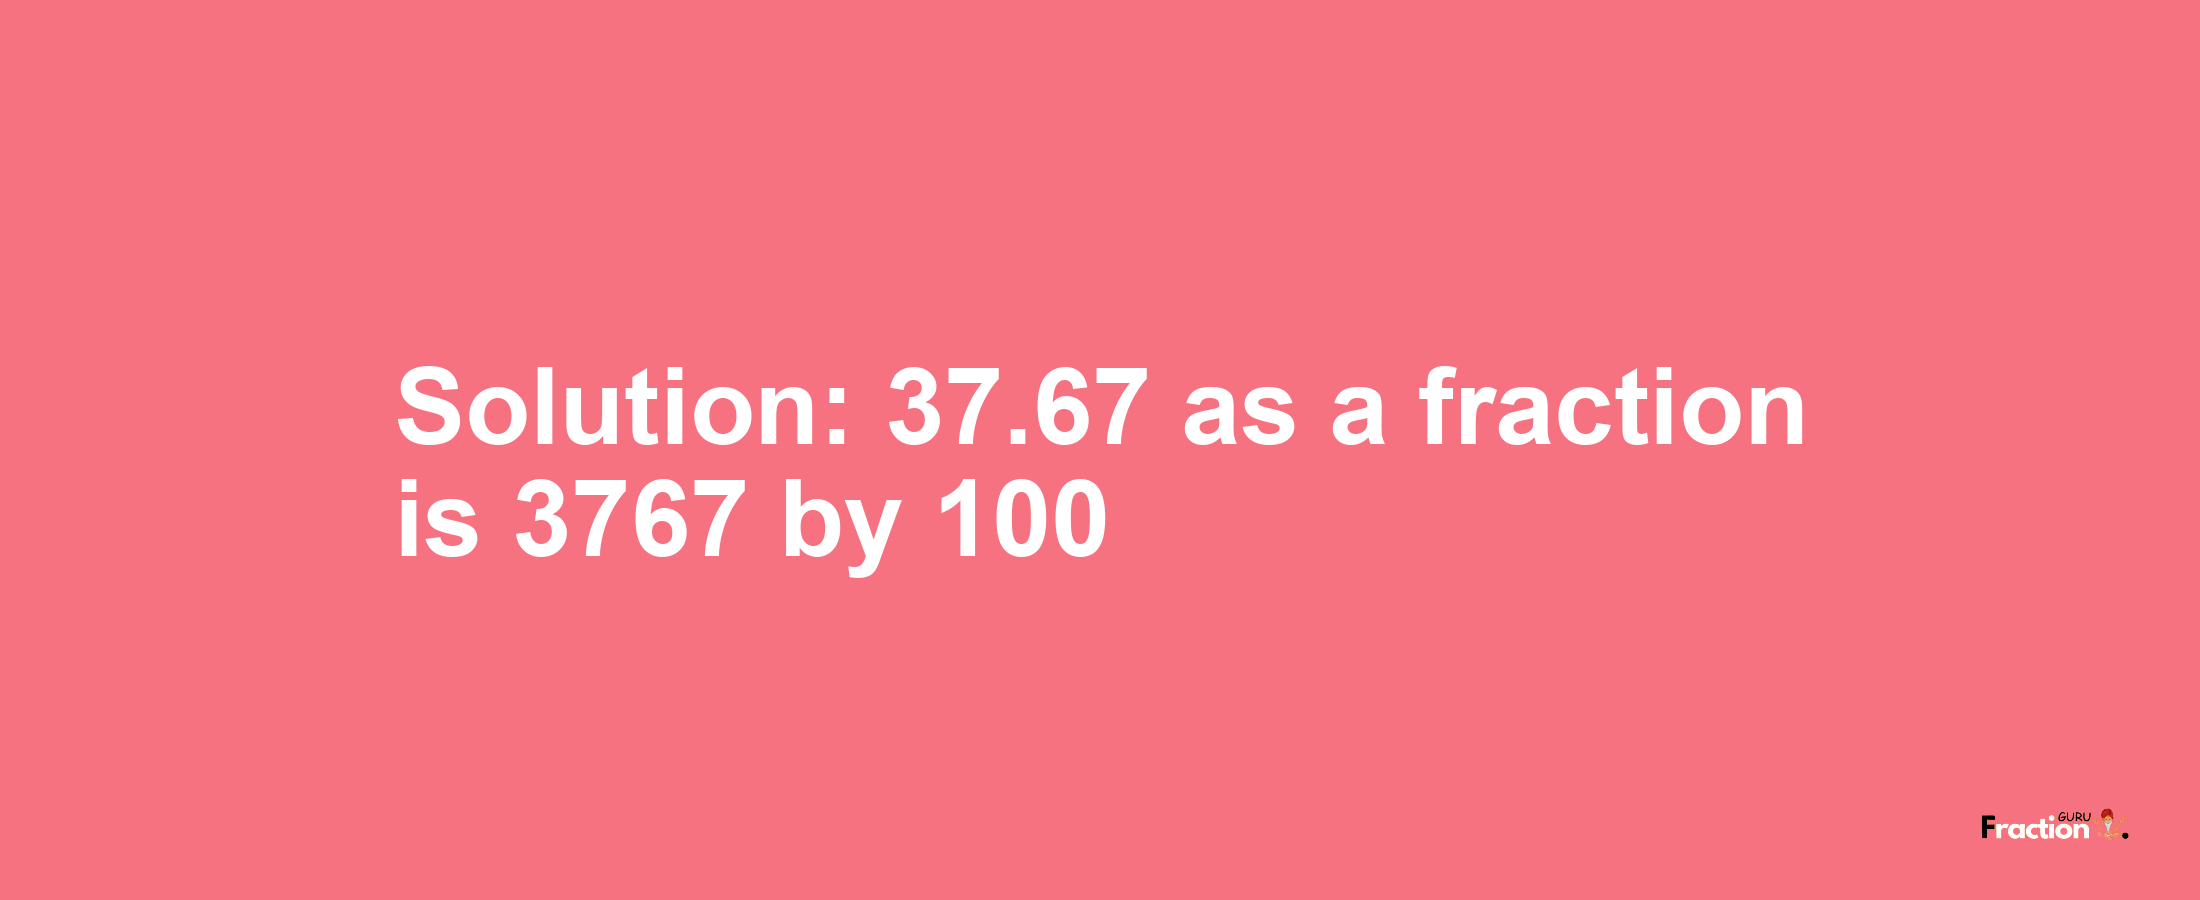 Solution:37.67 as a fraction is 3767/100